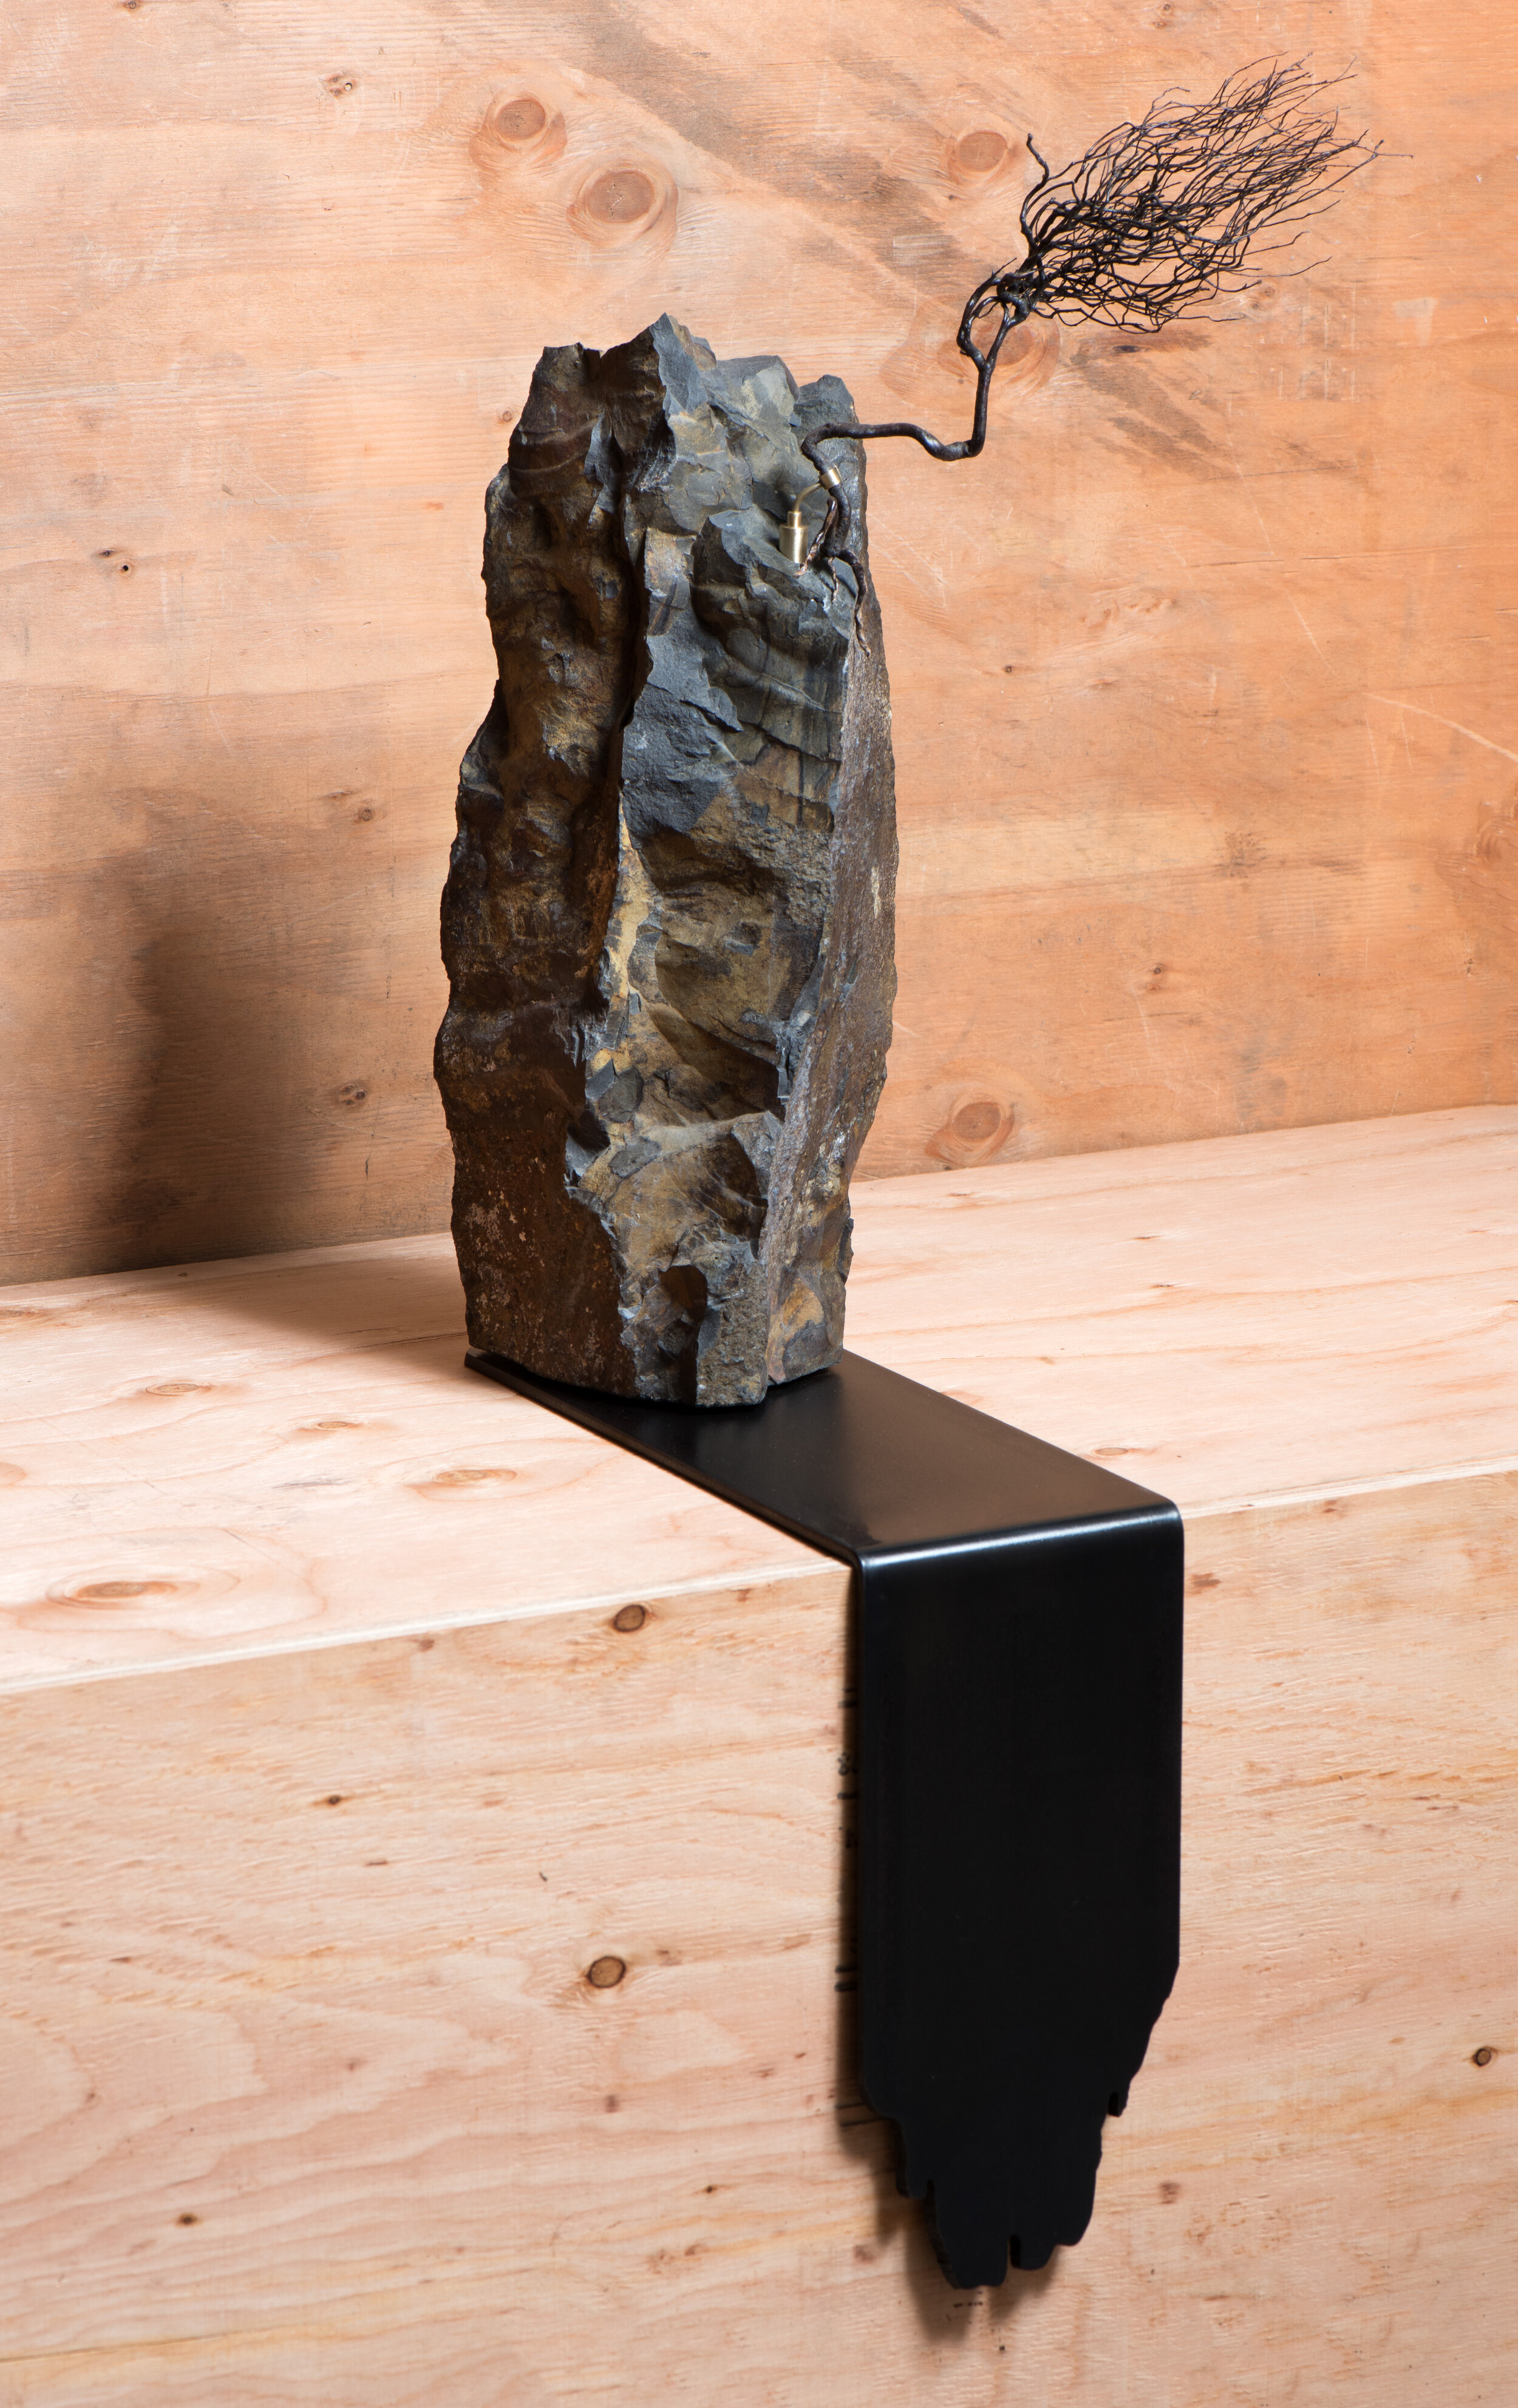   Burn, Brae, and Heathpack , 2019 Steel, basalt, and heather 39 x 8 x 18 inches Unique 